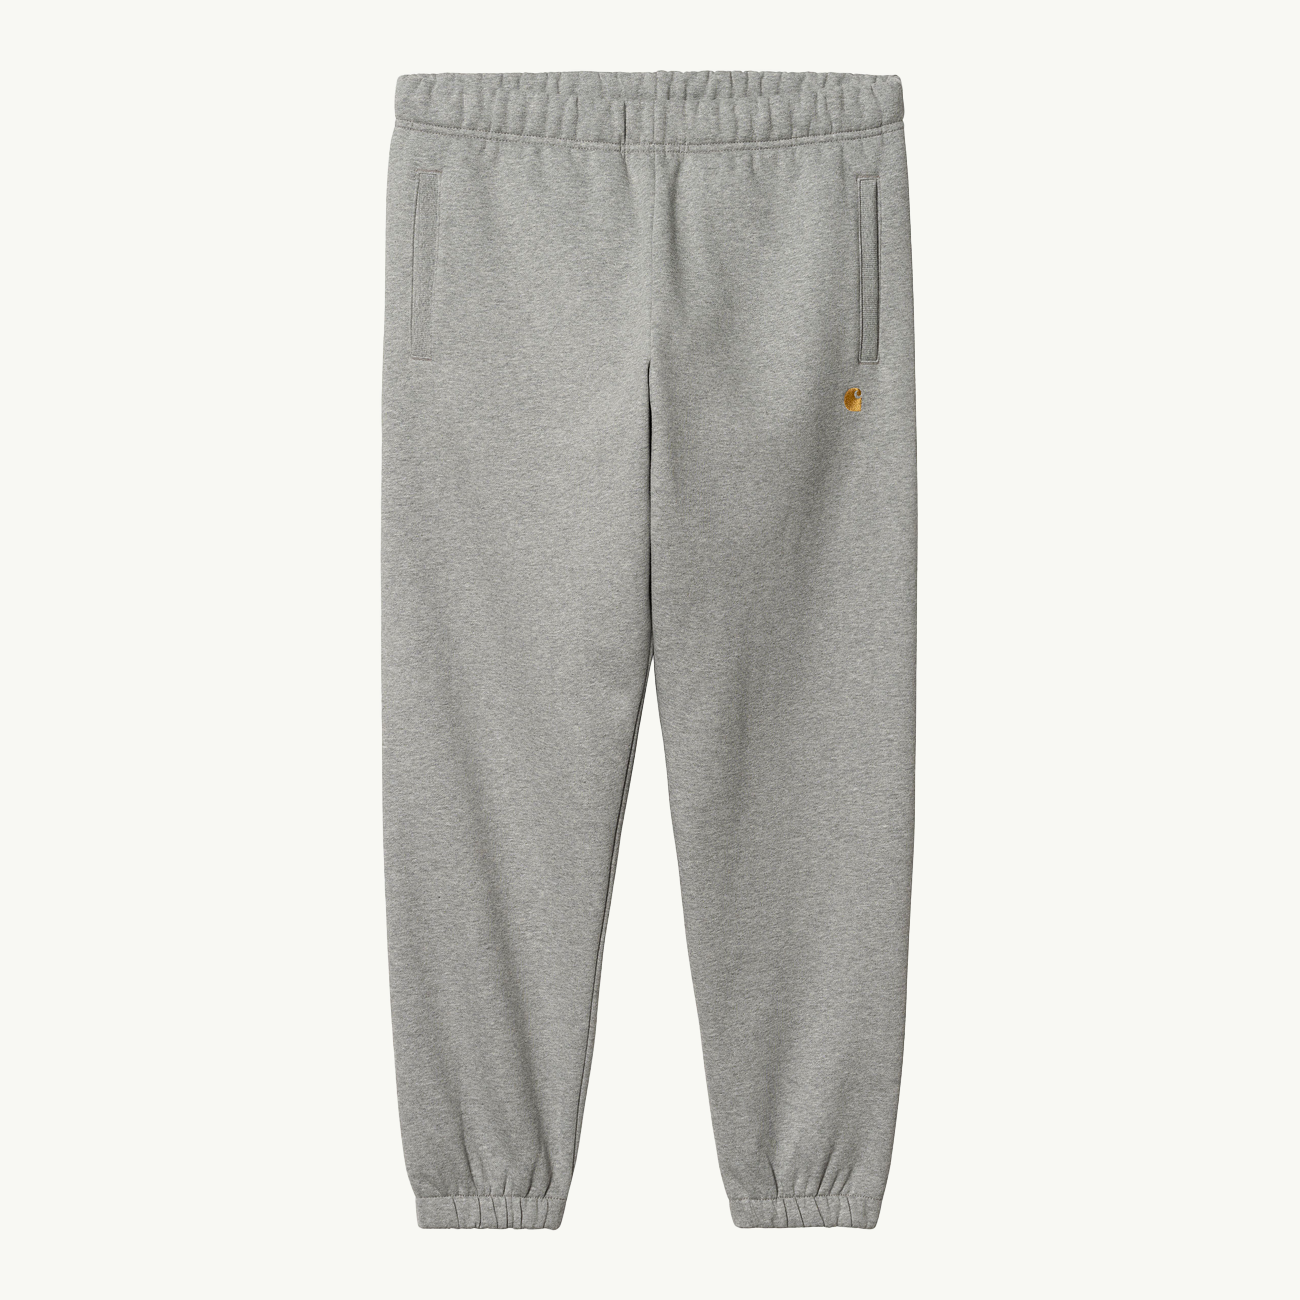 Chase Sweat Pant - Grey Heather/Gold